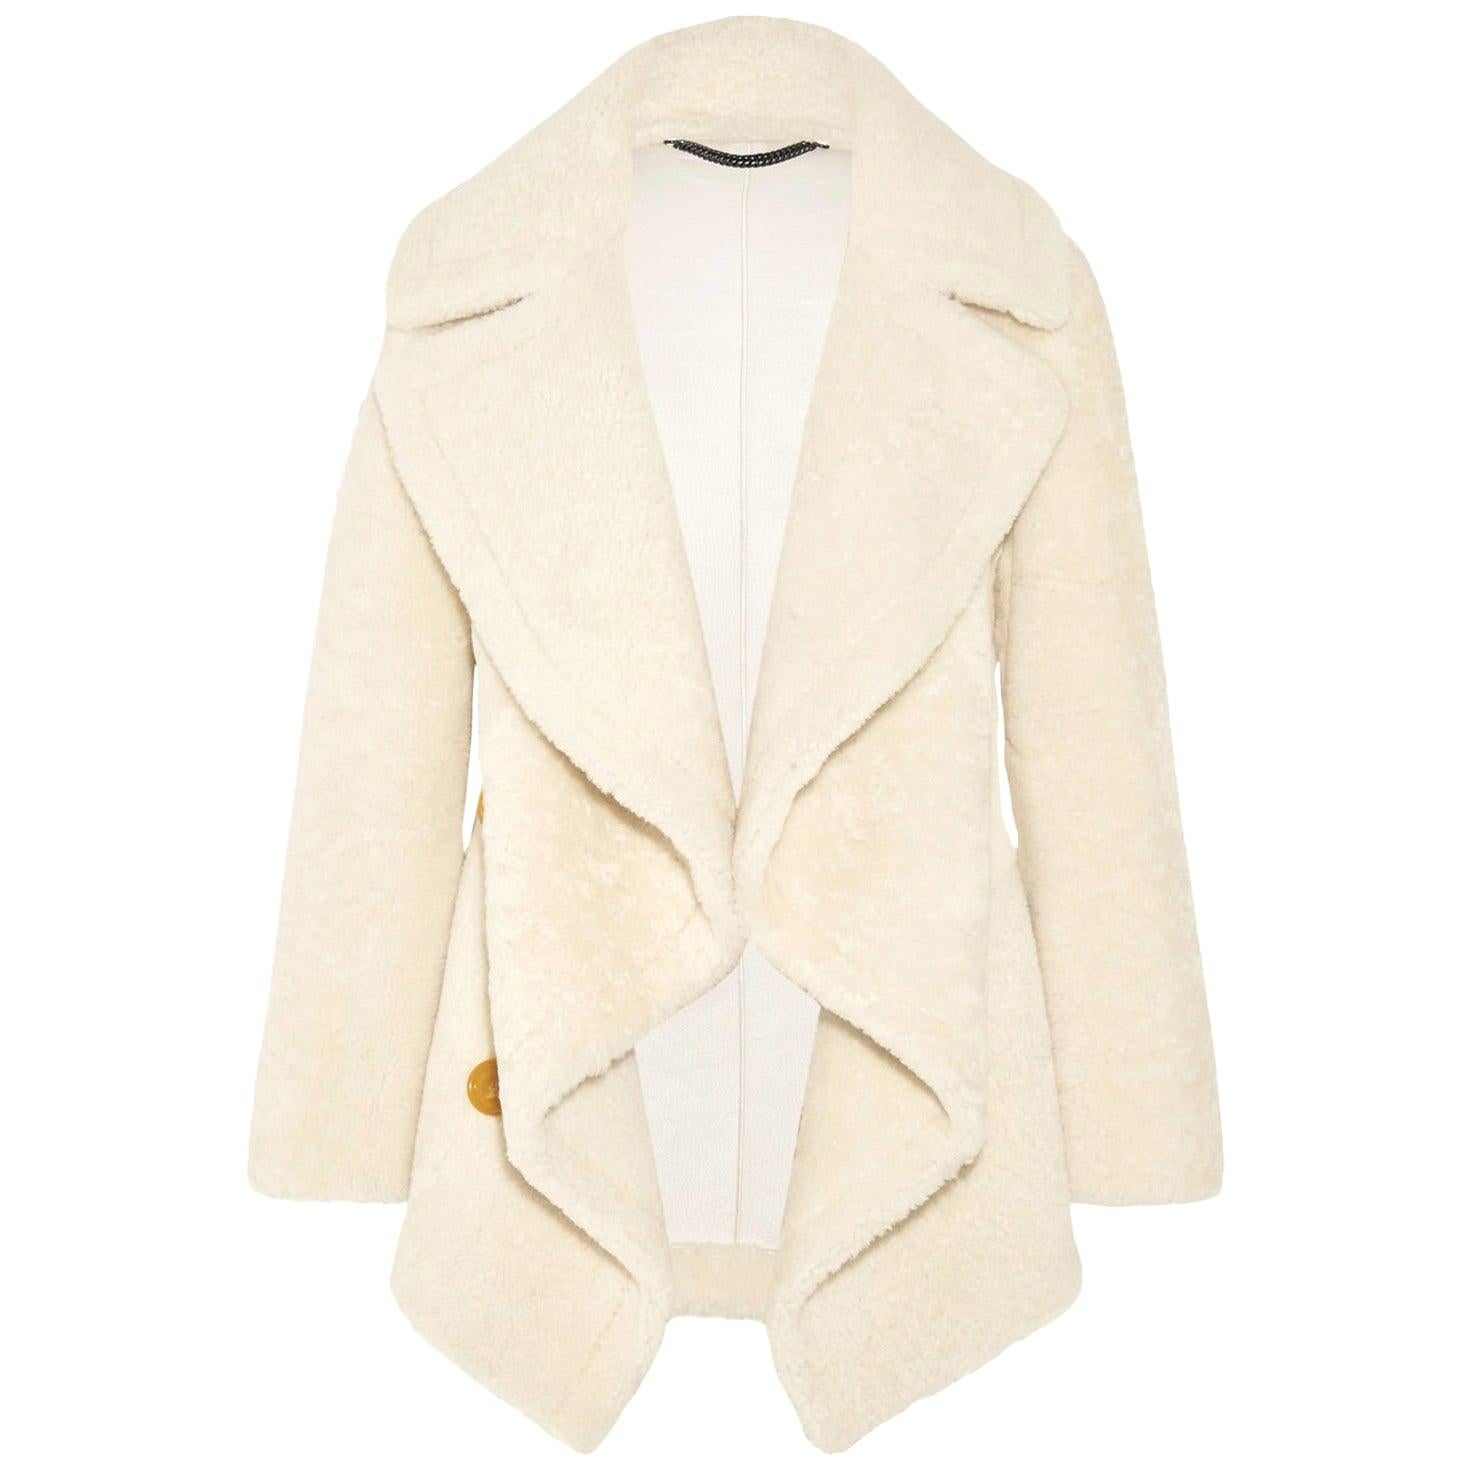 Burberry Shearling and Cable Knit Coat 